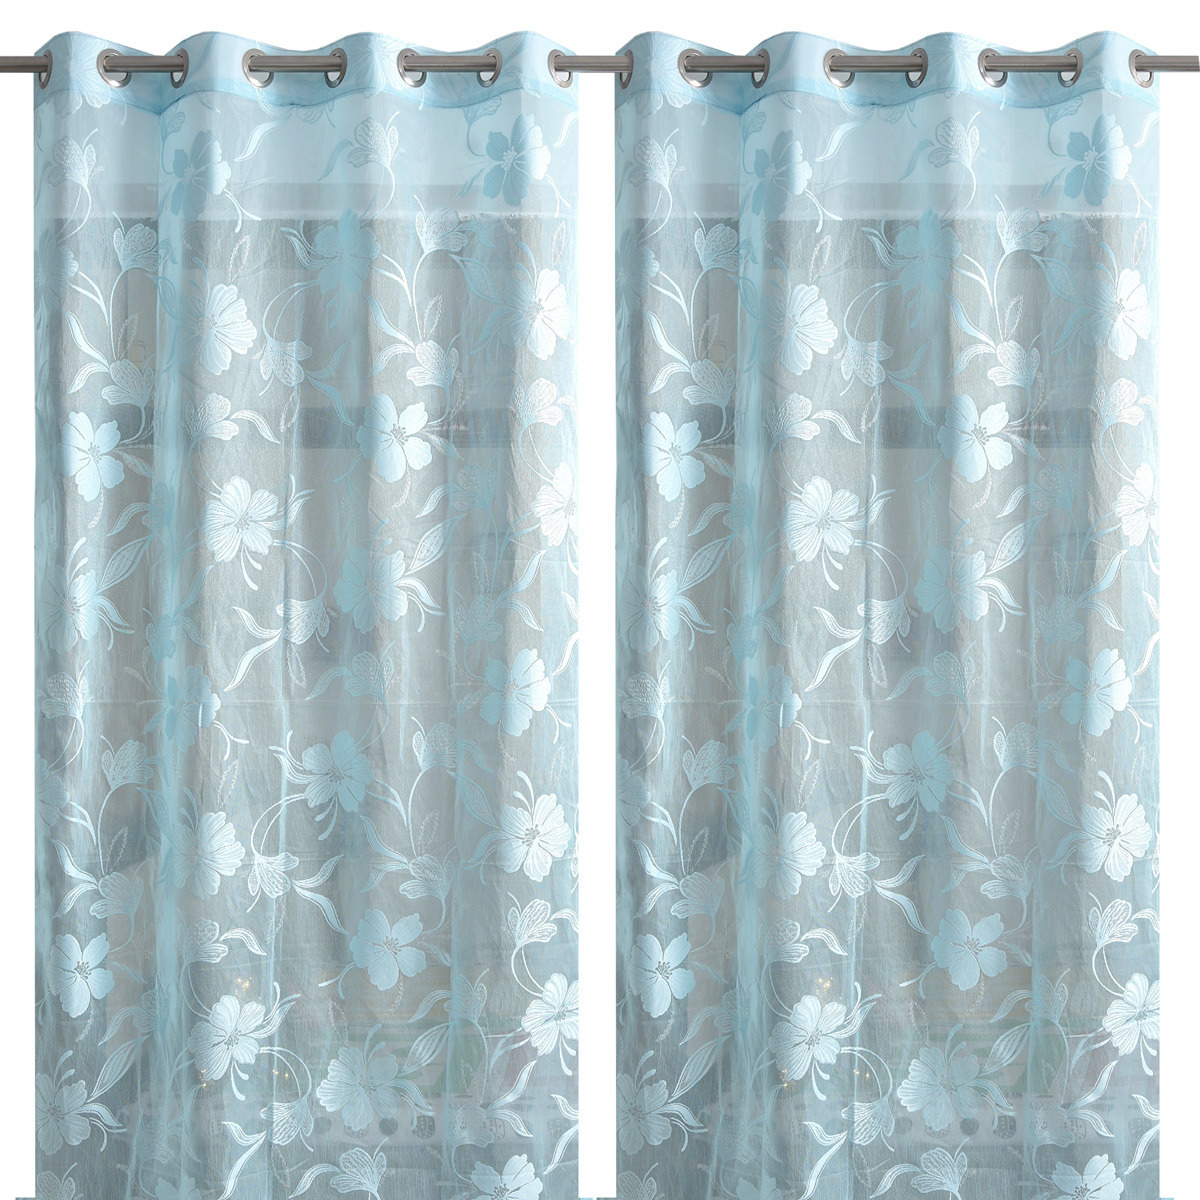 HANDTEX HOME Sheer Blue Net Curtains With Beautiful Embroidered Floral Designs for Door 4ft x 7ft Set of 2 SP04